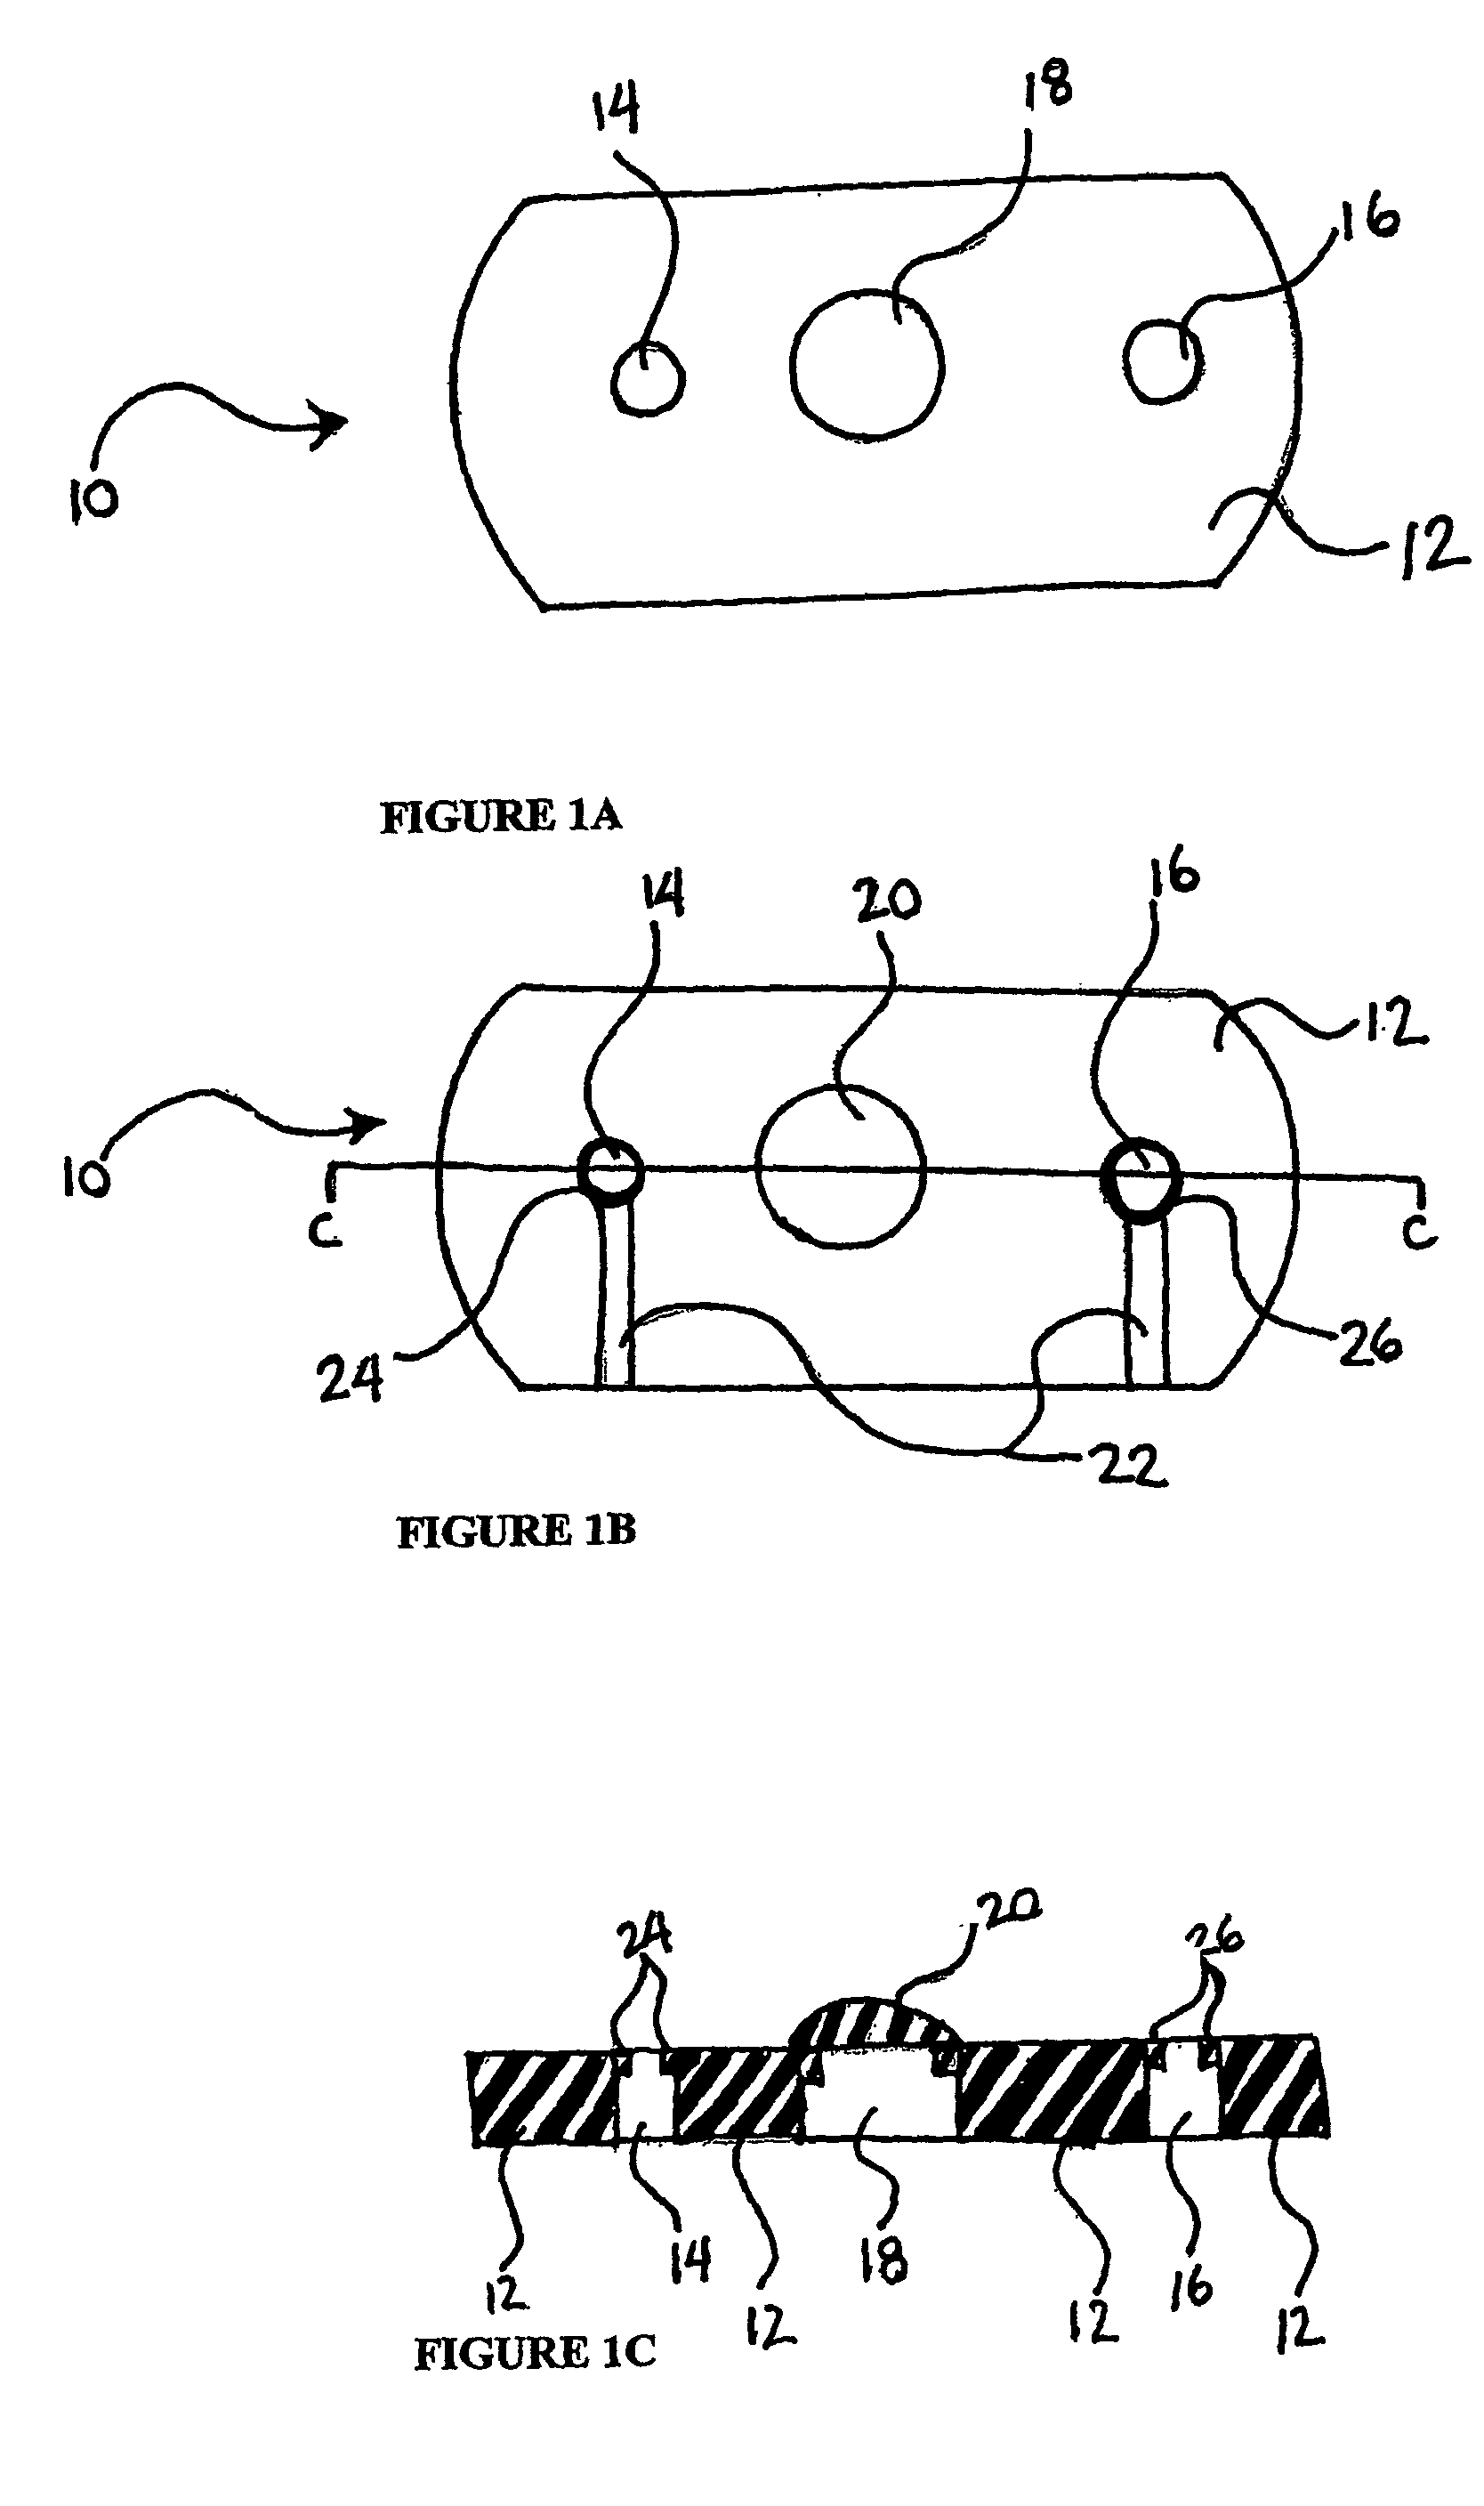 Methods and apparatus for urodynamic analysis